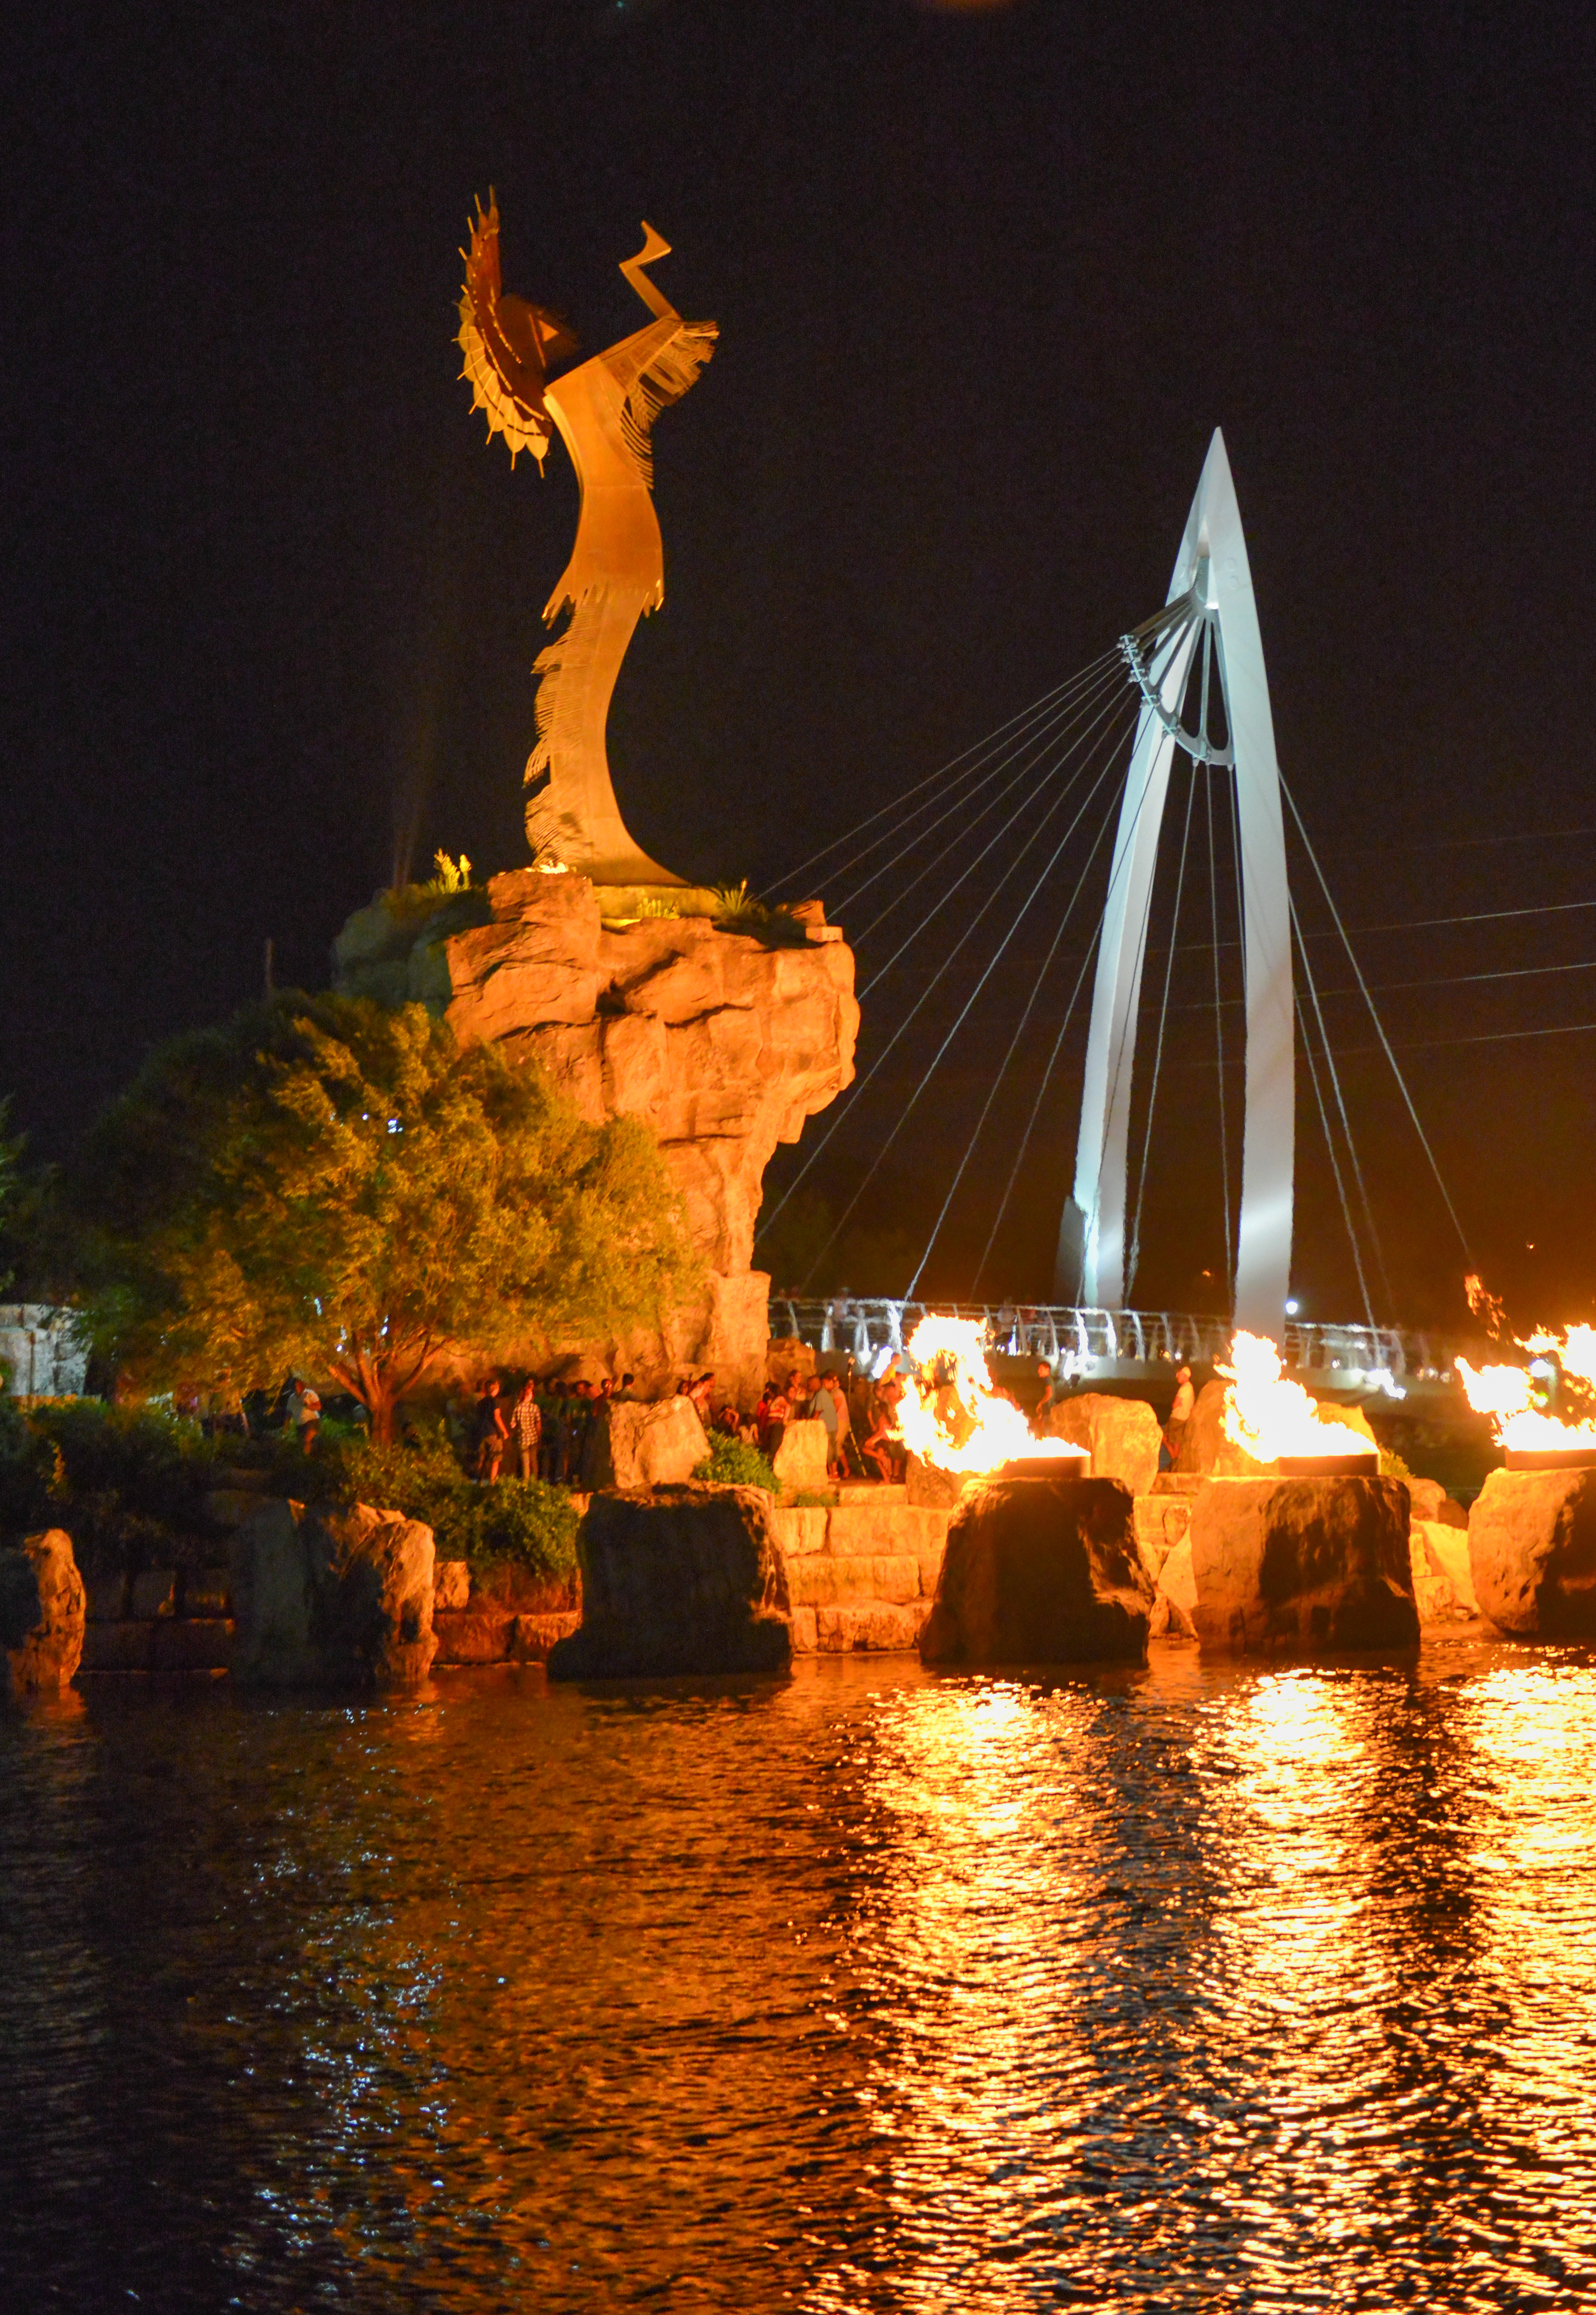 The Keeper of the Plains statue at night with the ring of fire celebration.